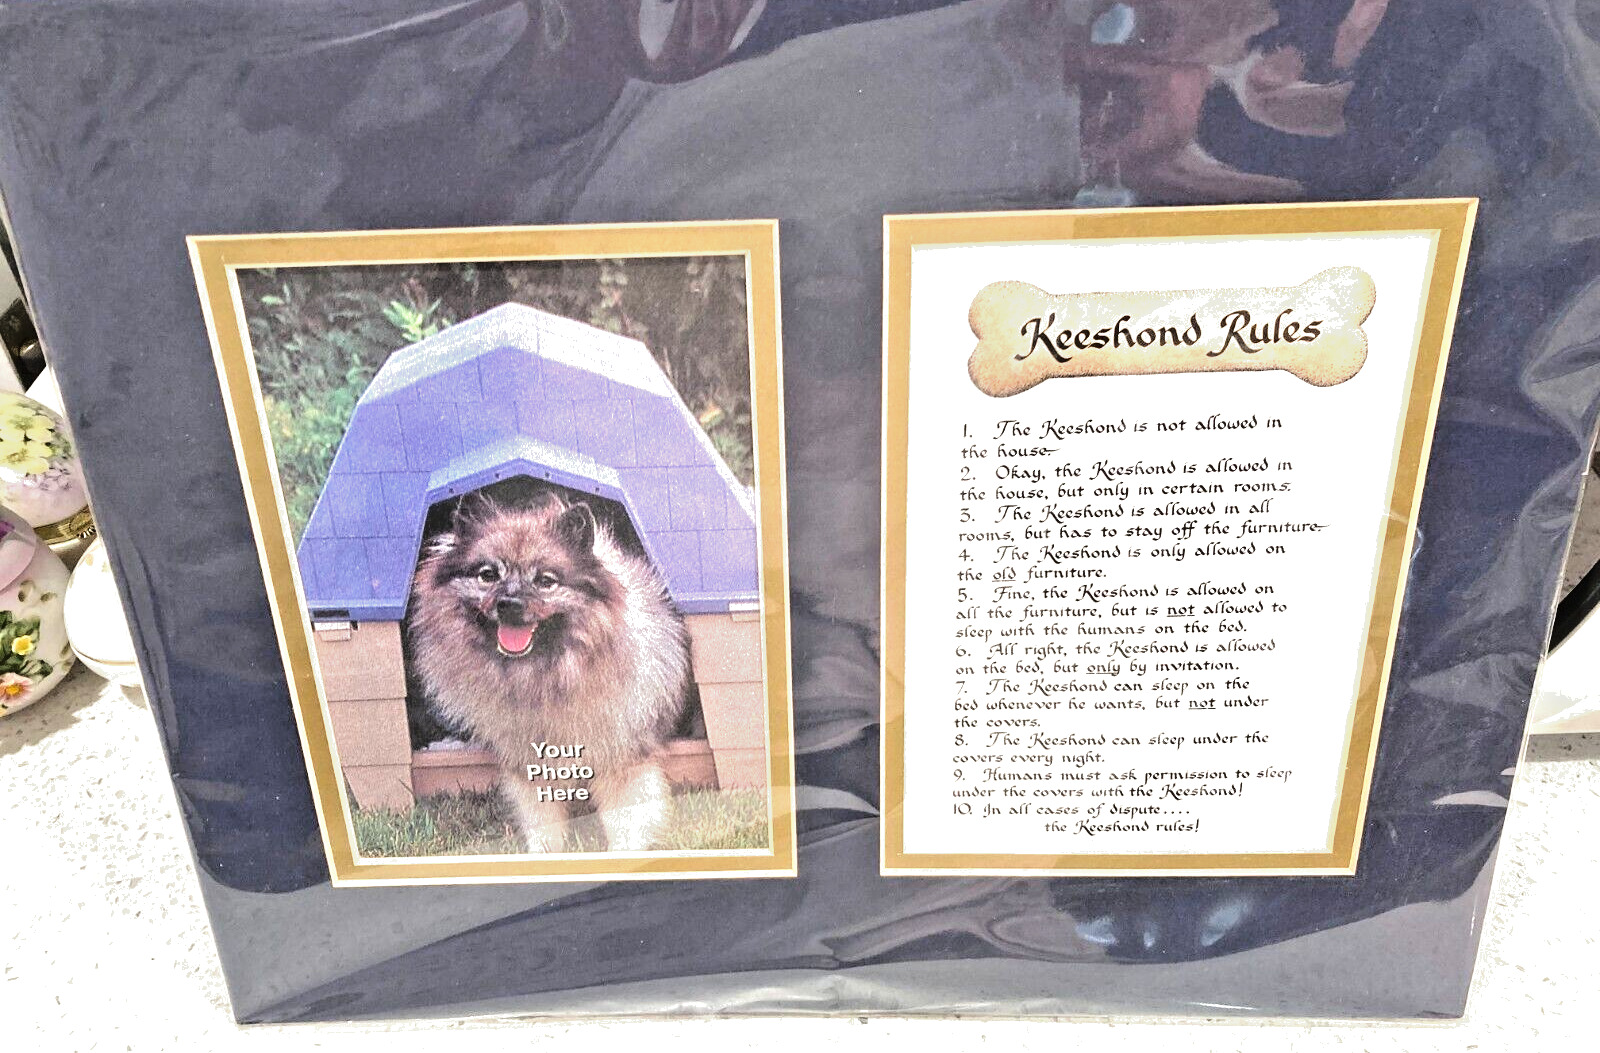 Rules In A Keeshond's House